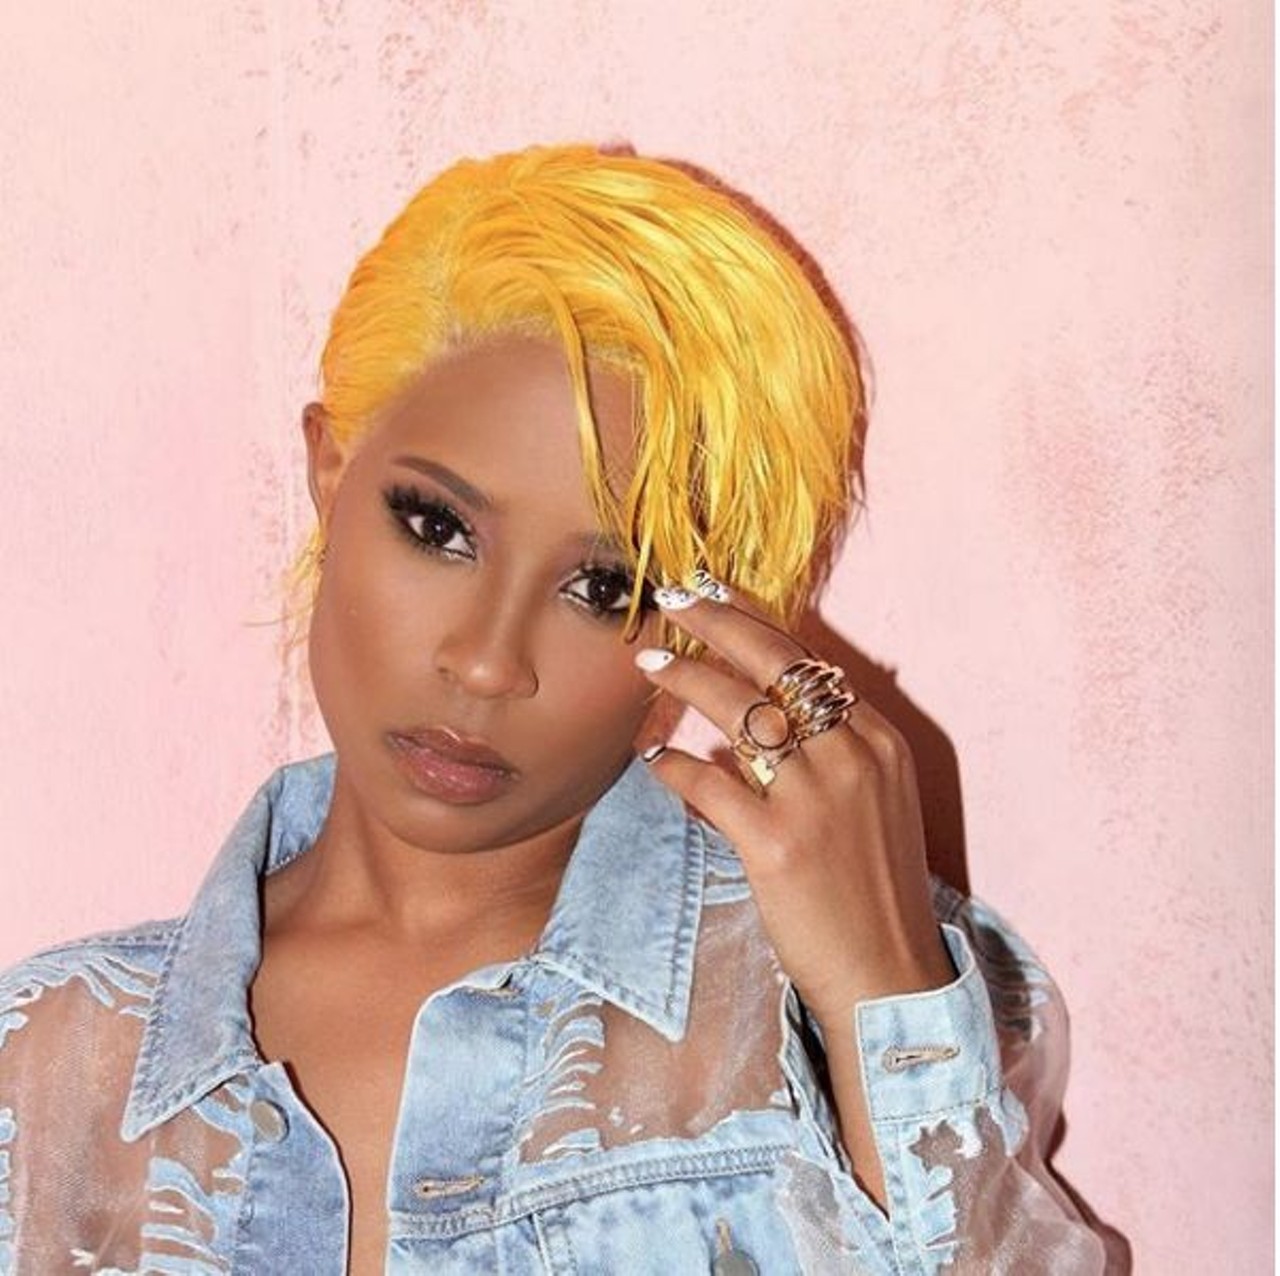 DeJ Loaf 
You might remember Dej Loaf from her 2014 YouTube hit &#147;Try Me.&#148; Soon she was featured on Eminem&#146;s massive &#147;Detroit Vs. Everybody&#148; and was later invited to join Nicki Minaj on tour. Last year she teased the release of her debut record, Liberated, with the single &#147;No Fear.&#148; Prepare for blast-off, because Dej  she hasn&#146;t even gotten started yet. 
Photo via Instagram / @dejloaf